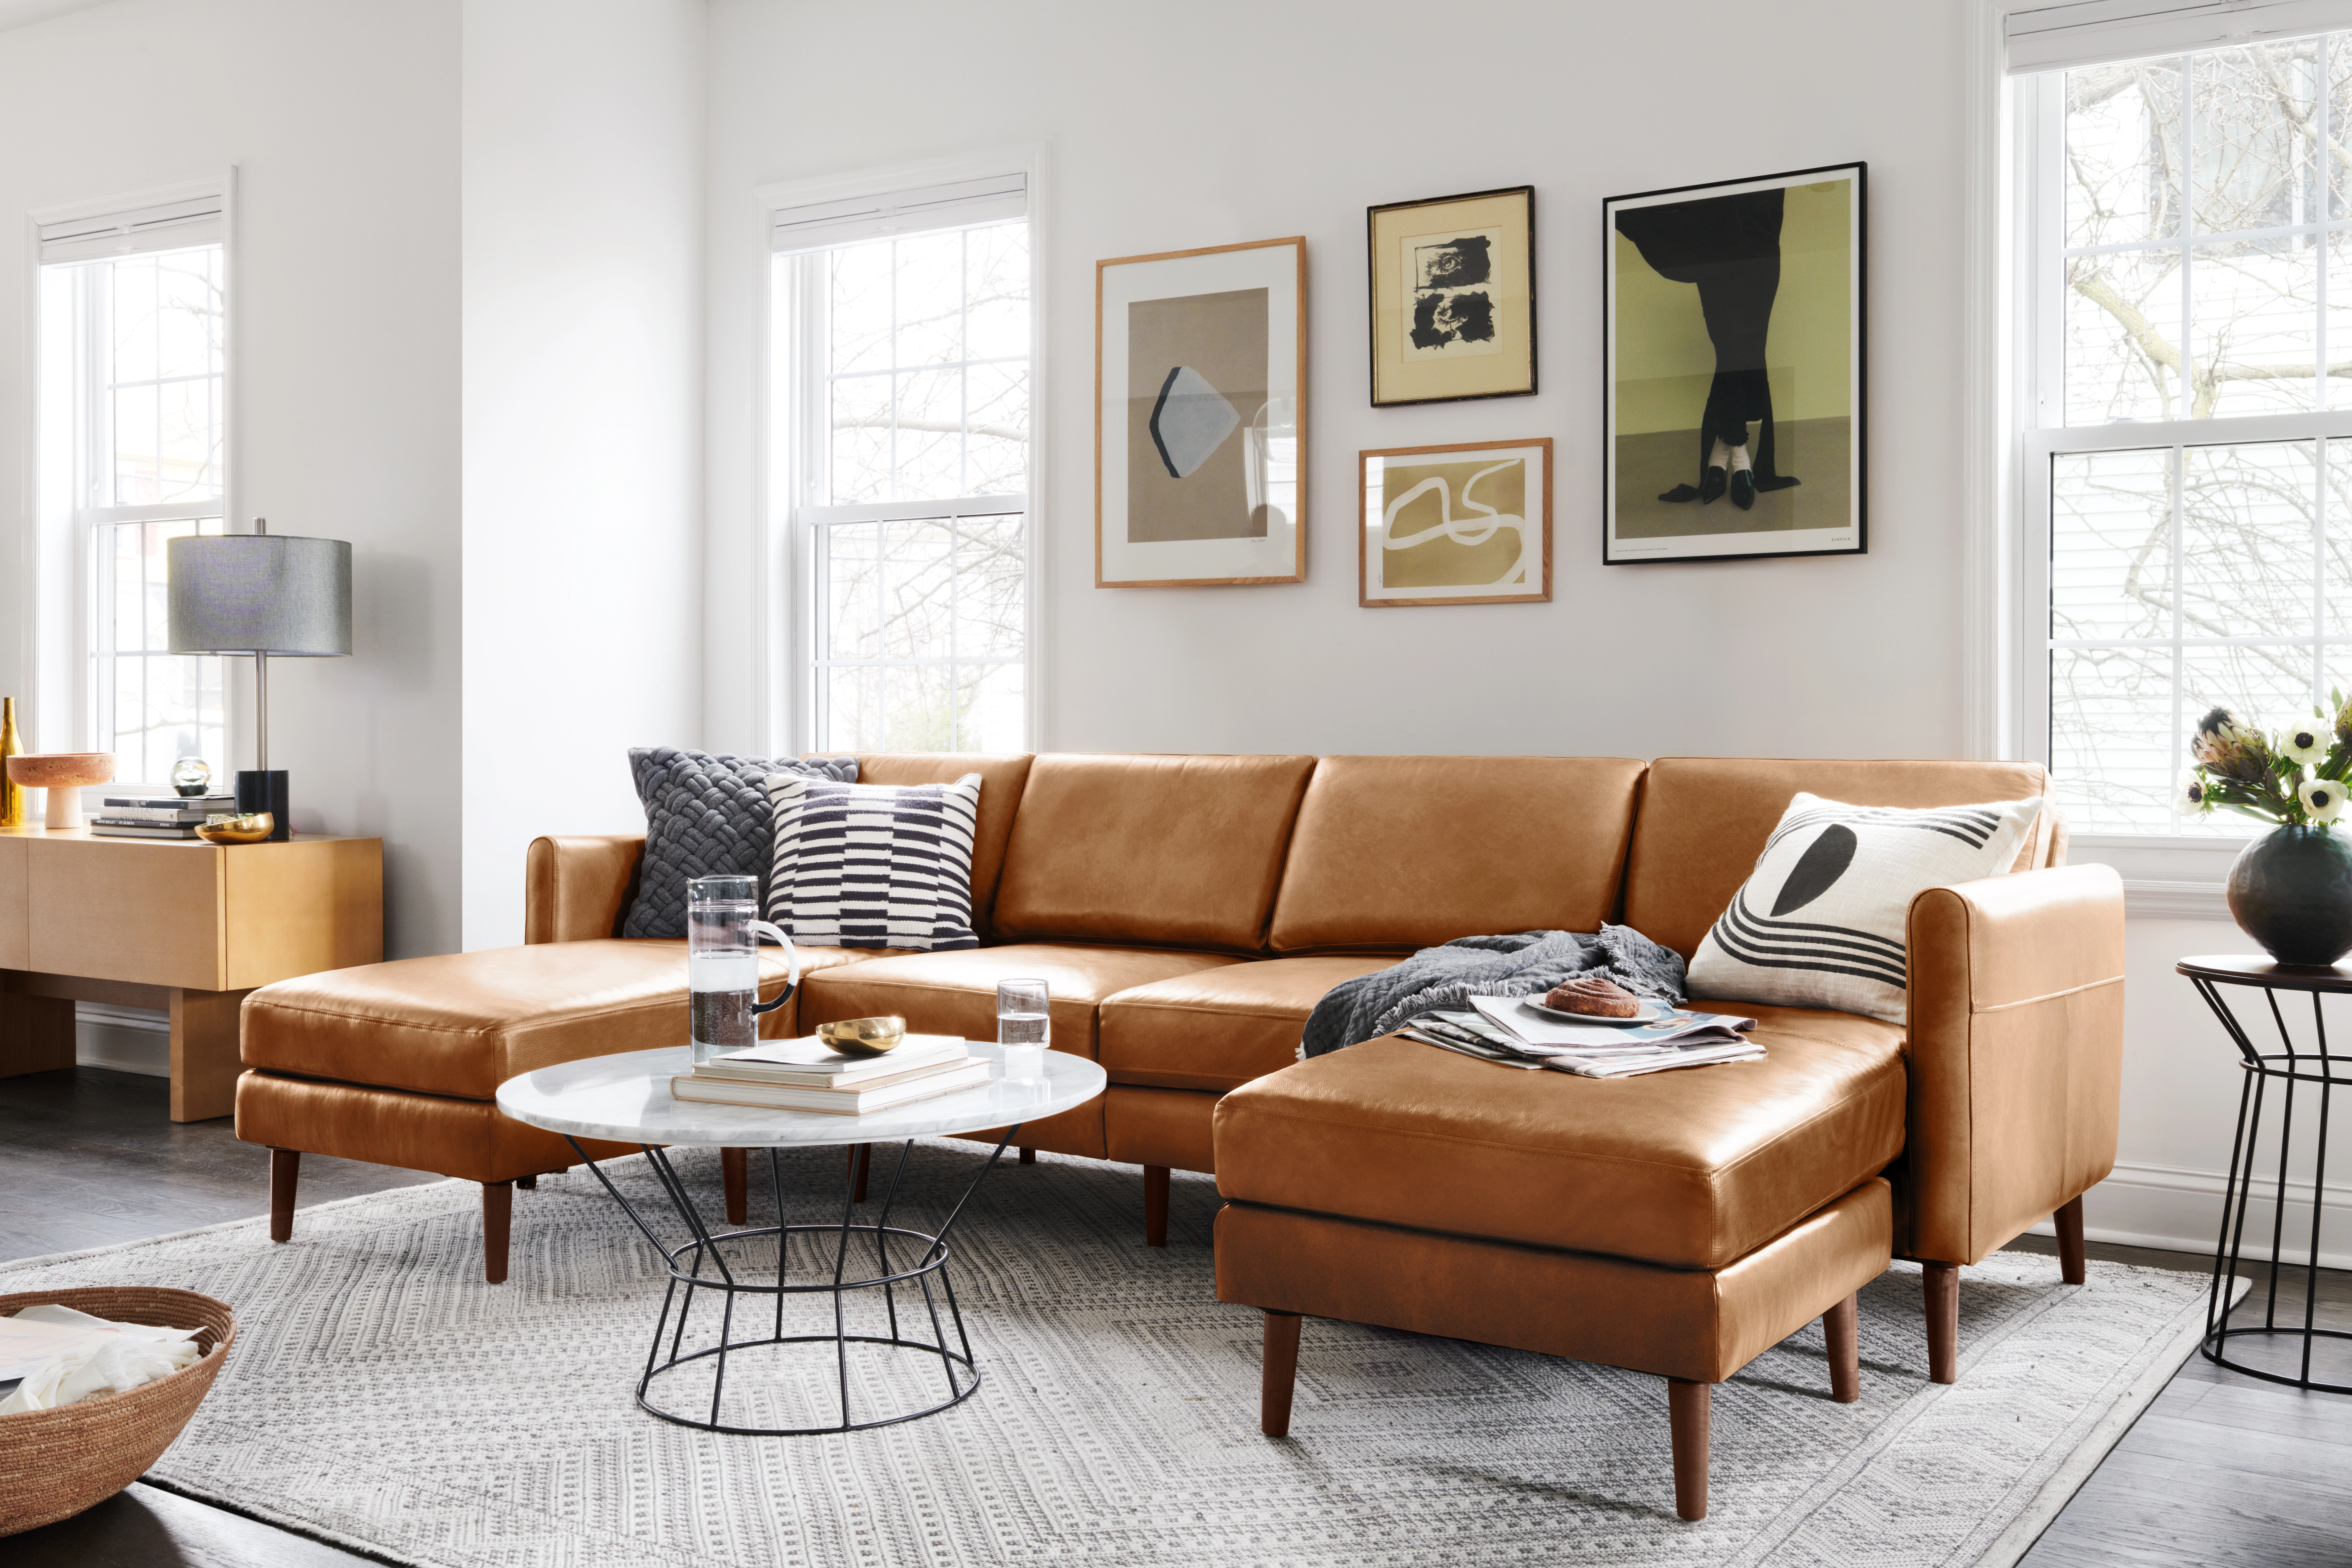 Restore Your Old Leather Sofa for Your Trendy New York Home